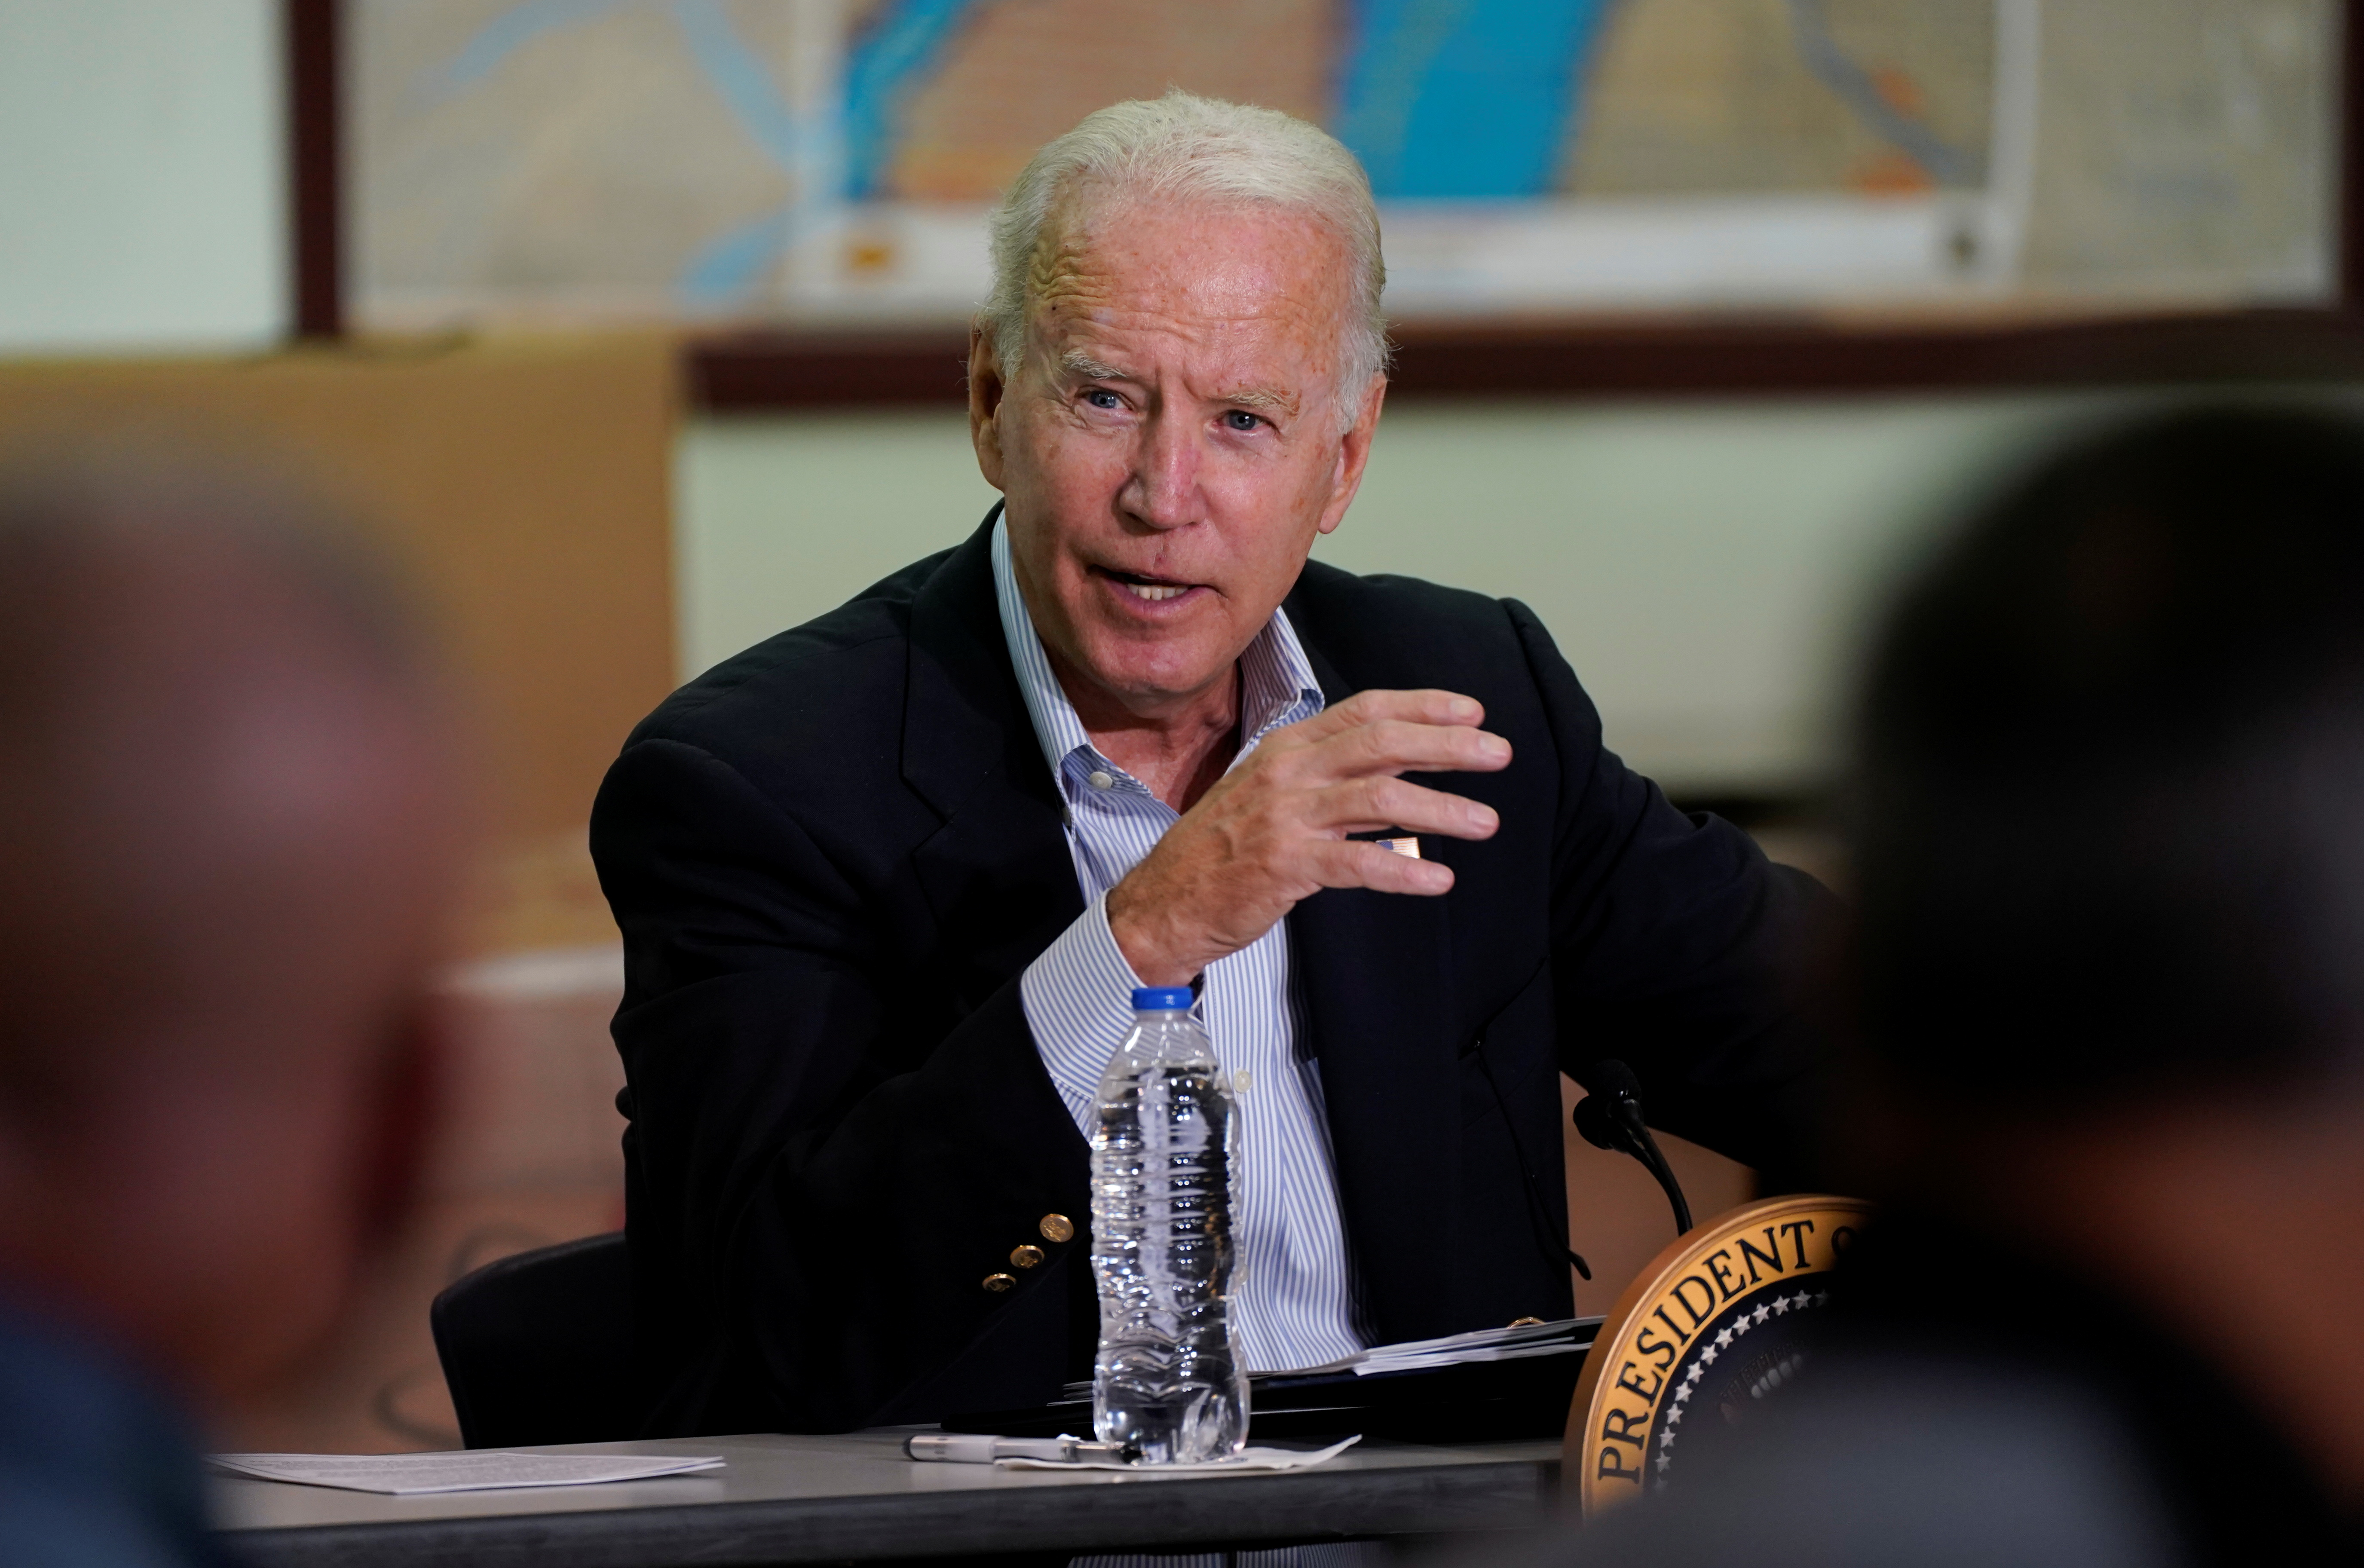 U.S. President Joe Biden speaks during a briefing by local leaders on the impact of the remnants of Tropical Storm Ida at Somerset County Emergency Management Training Center in Hillsborough Township, New Jersey, U.S., September 7, 2021. REUTERS/Elizabeth Frantz